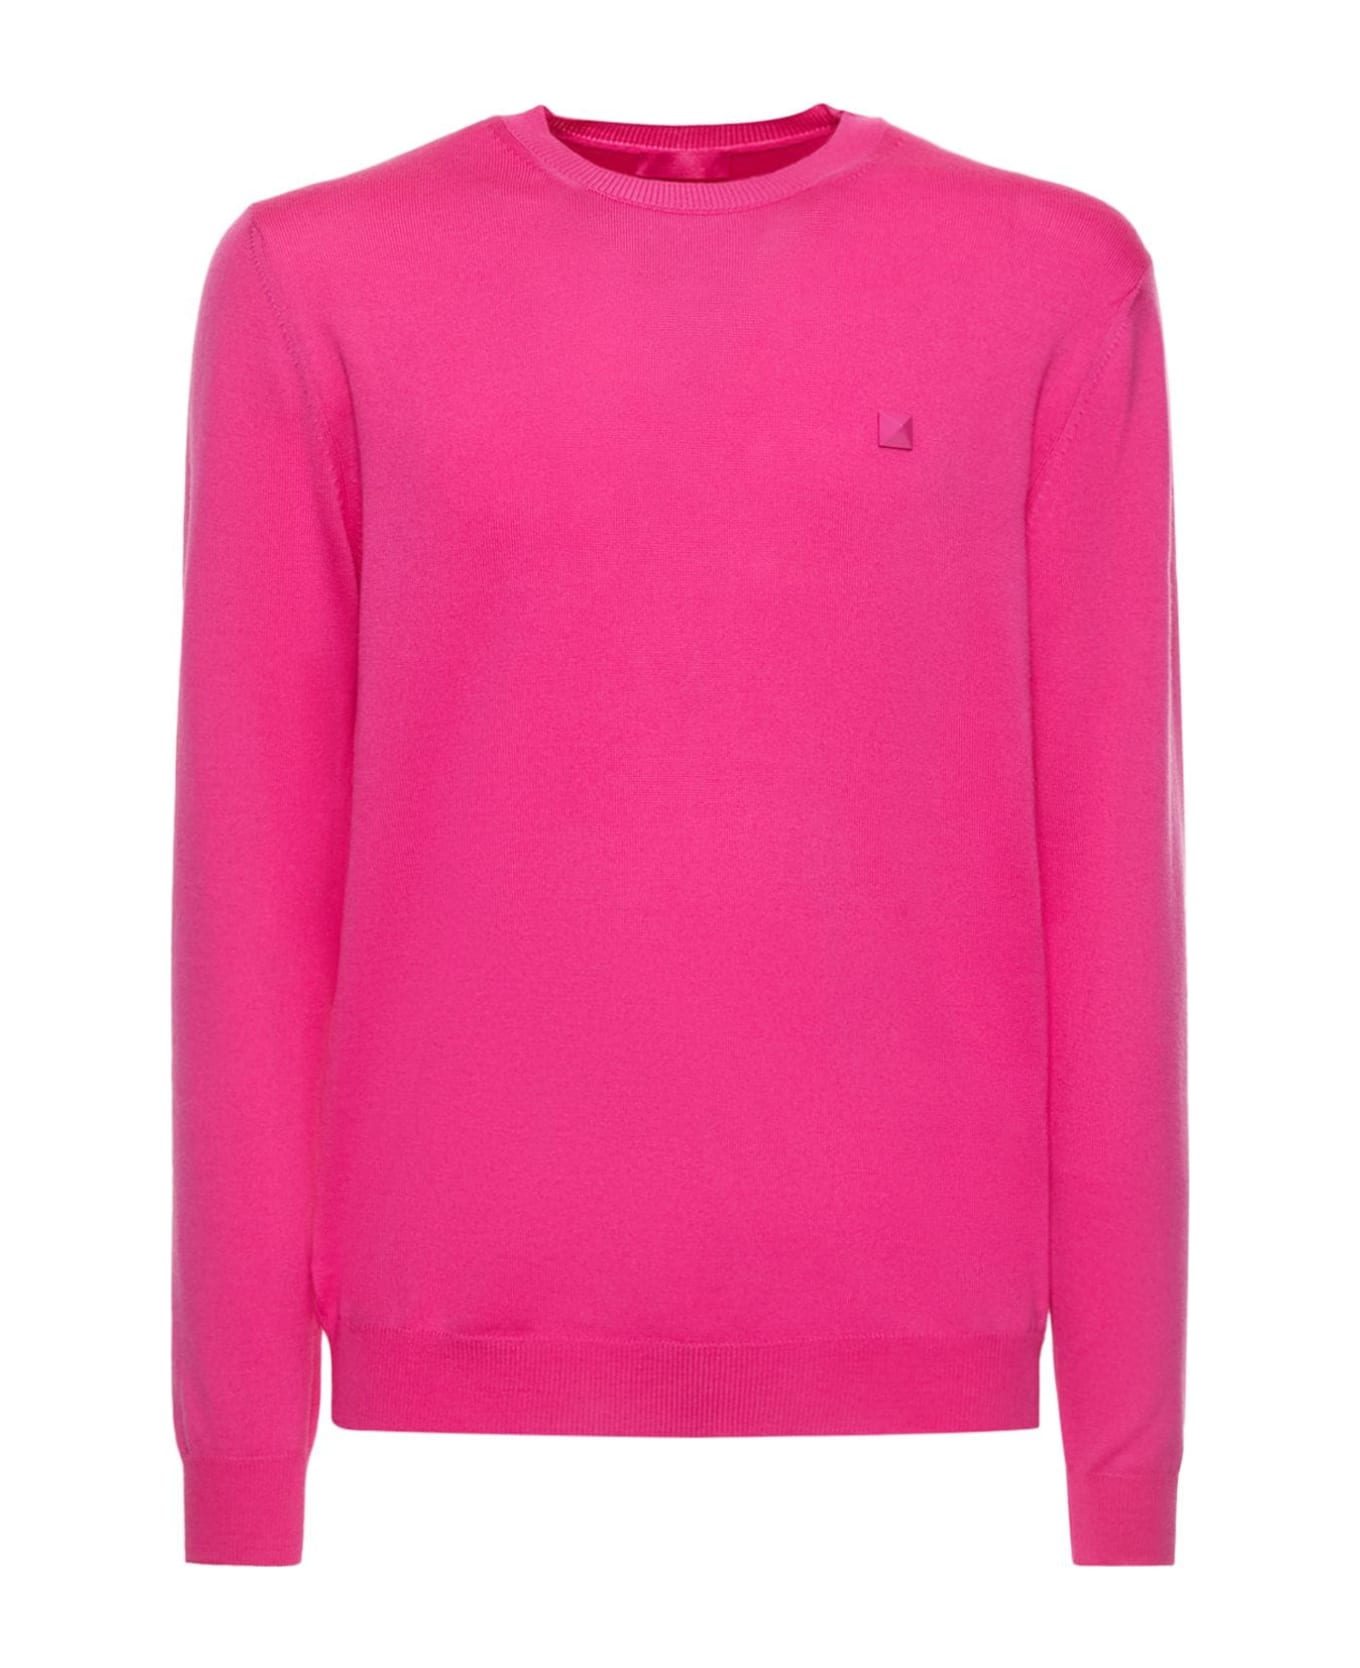 Valentino Chest Stud Plain Ribbed Sweater - Pink